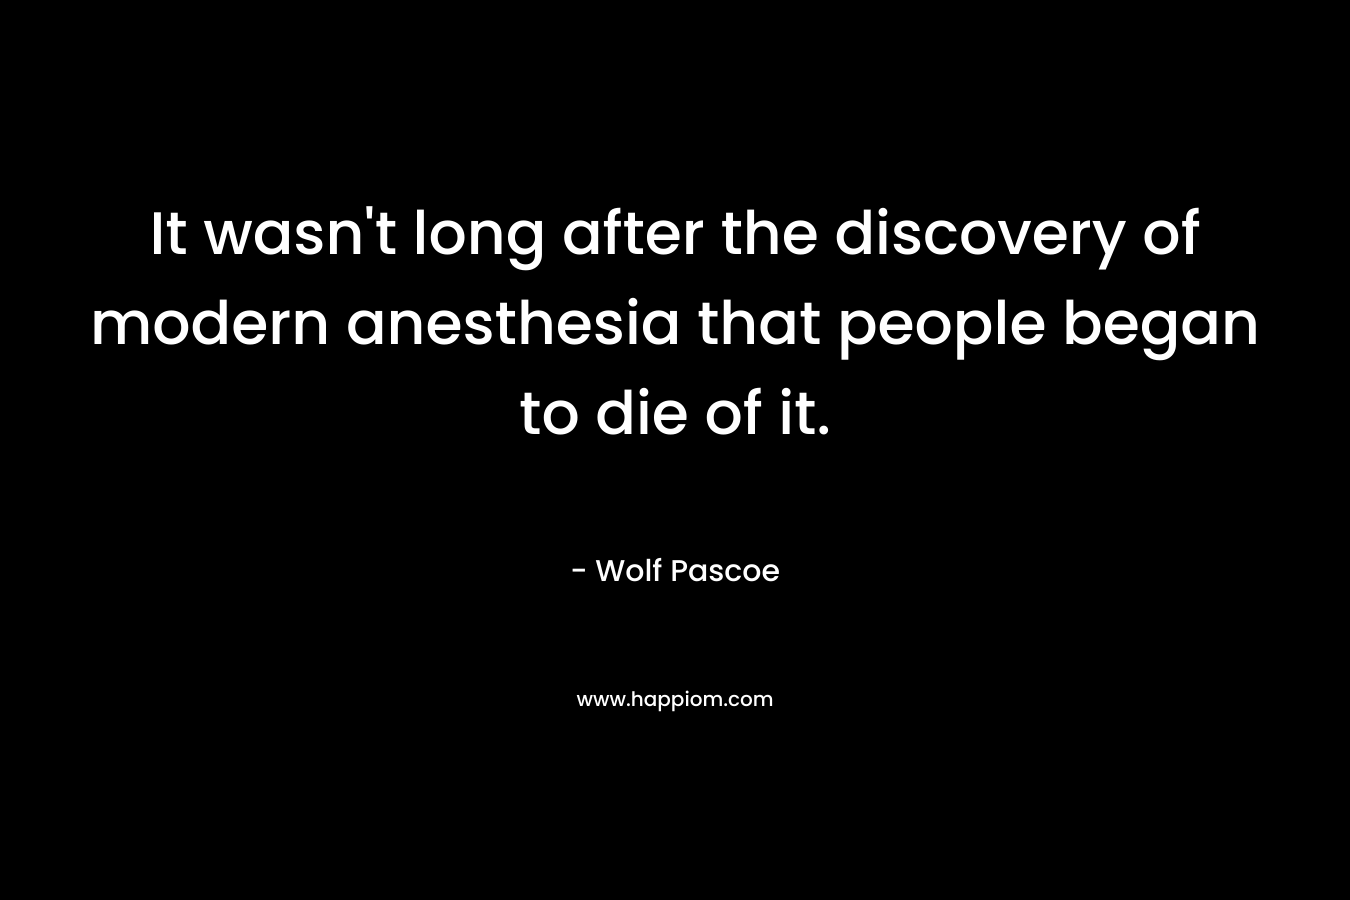 It wasn’t long after the discovery of modern anesthesia that people began to die of it. – Wolf Pascoe